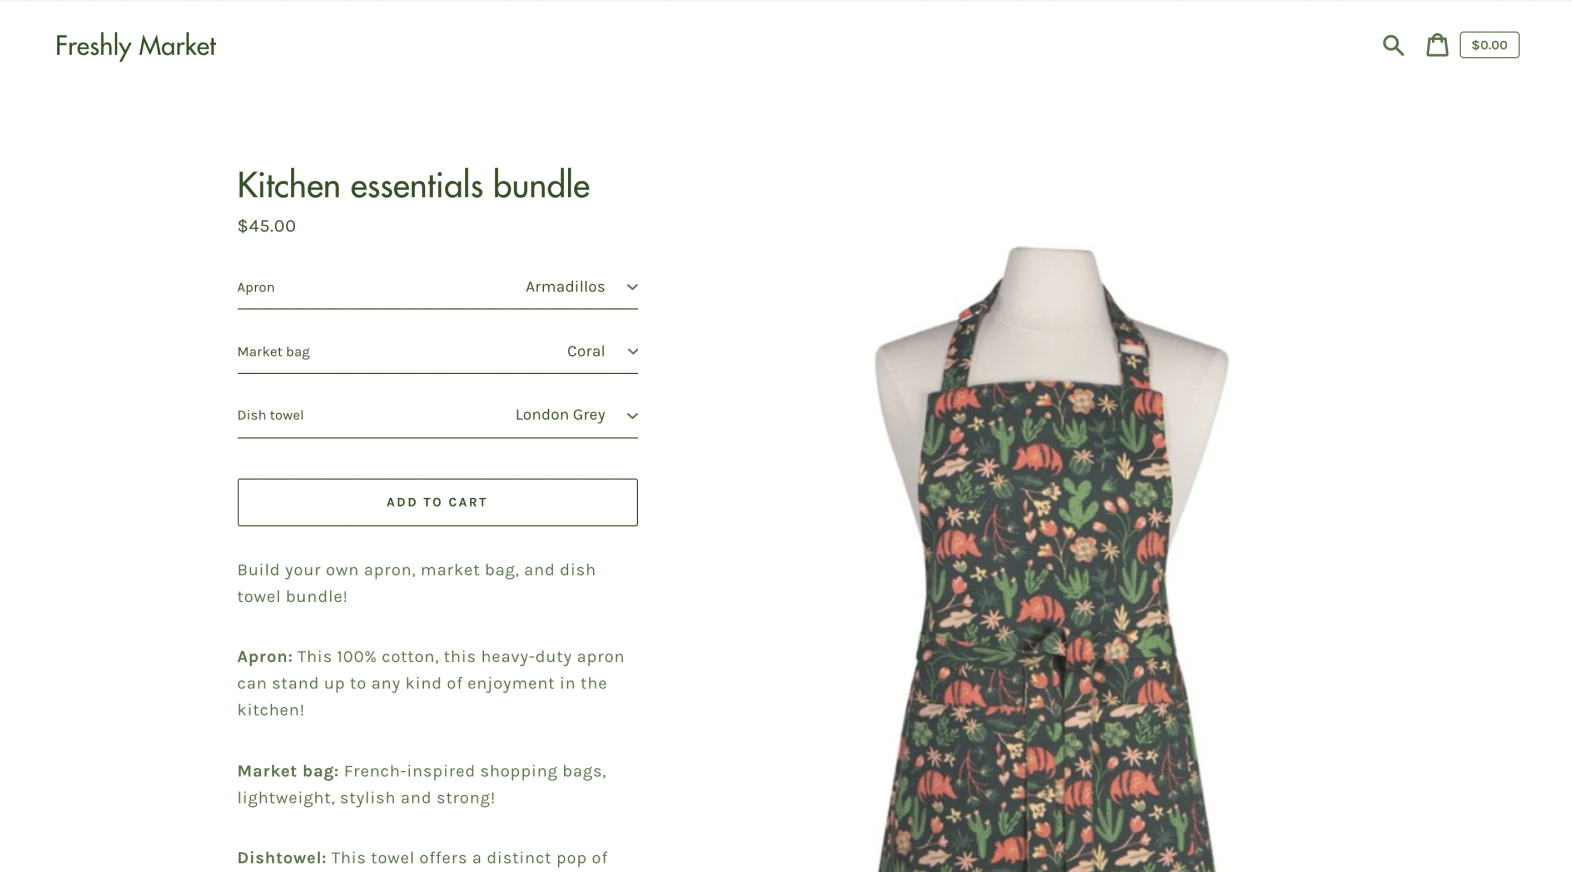 A Kitchen essentials bundle product page, which tells customers to pick an apron color, market bag color, and dish towel color to create their bundle.